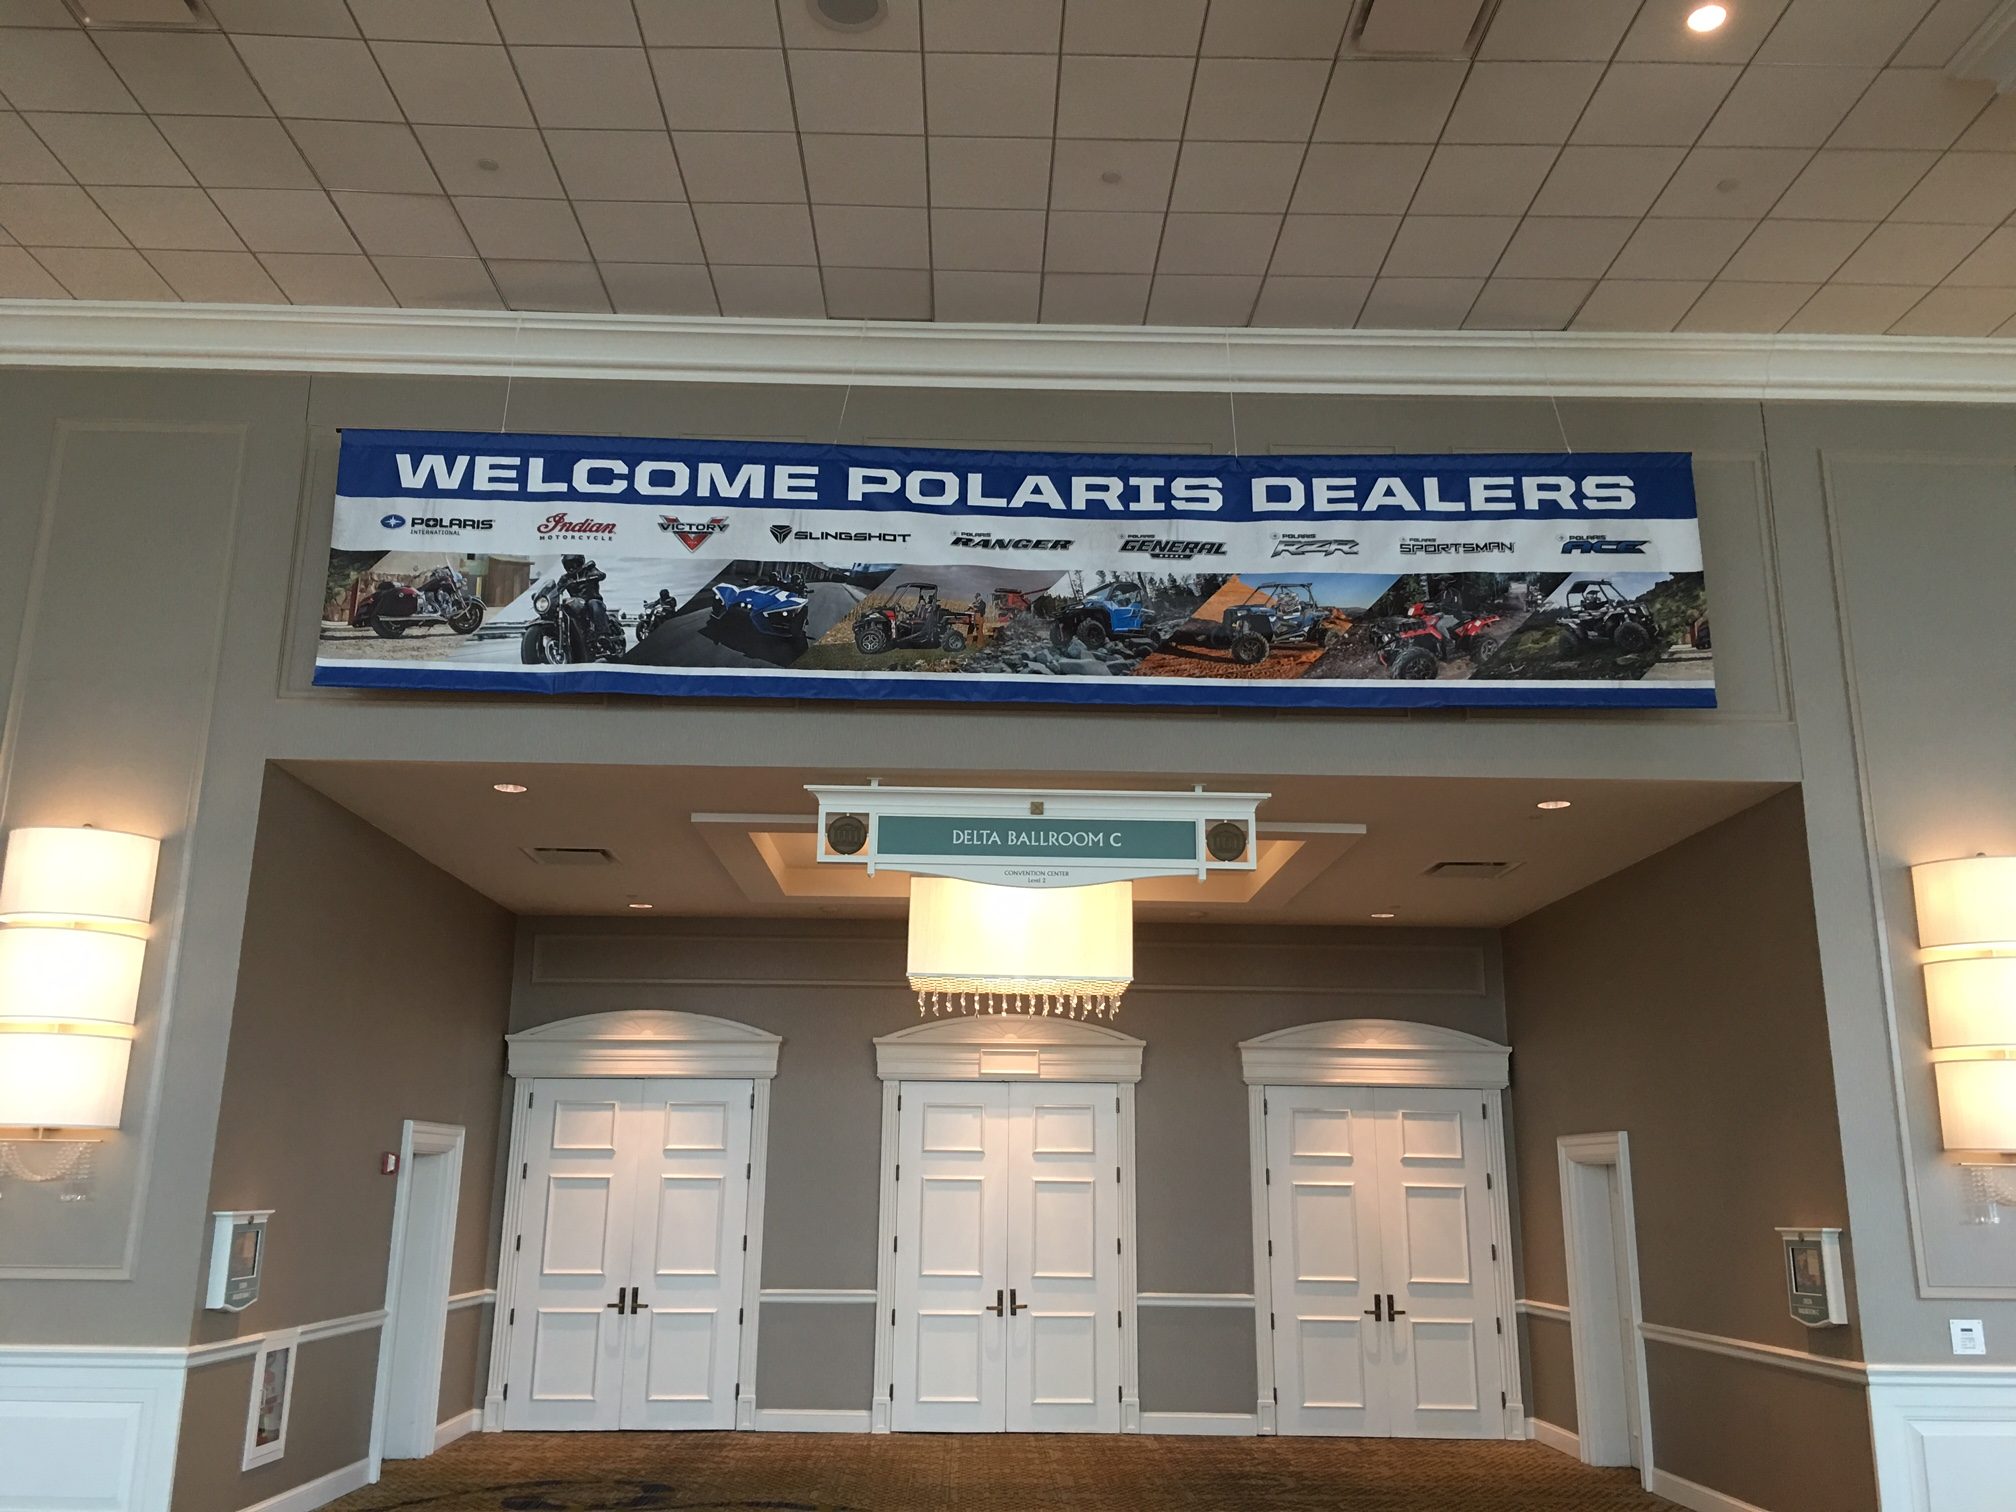 Tropicars is live at the Polaris Dealer Meeting in Nashville, TN